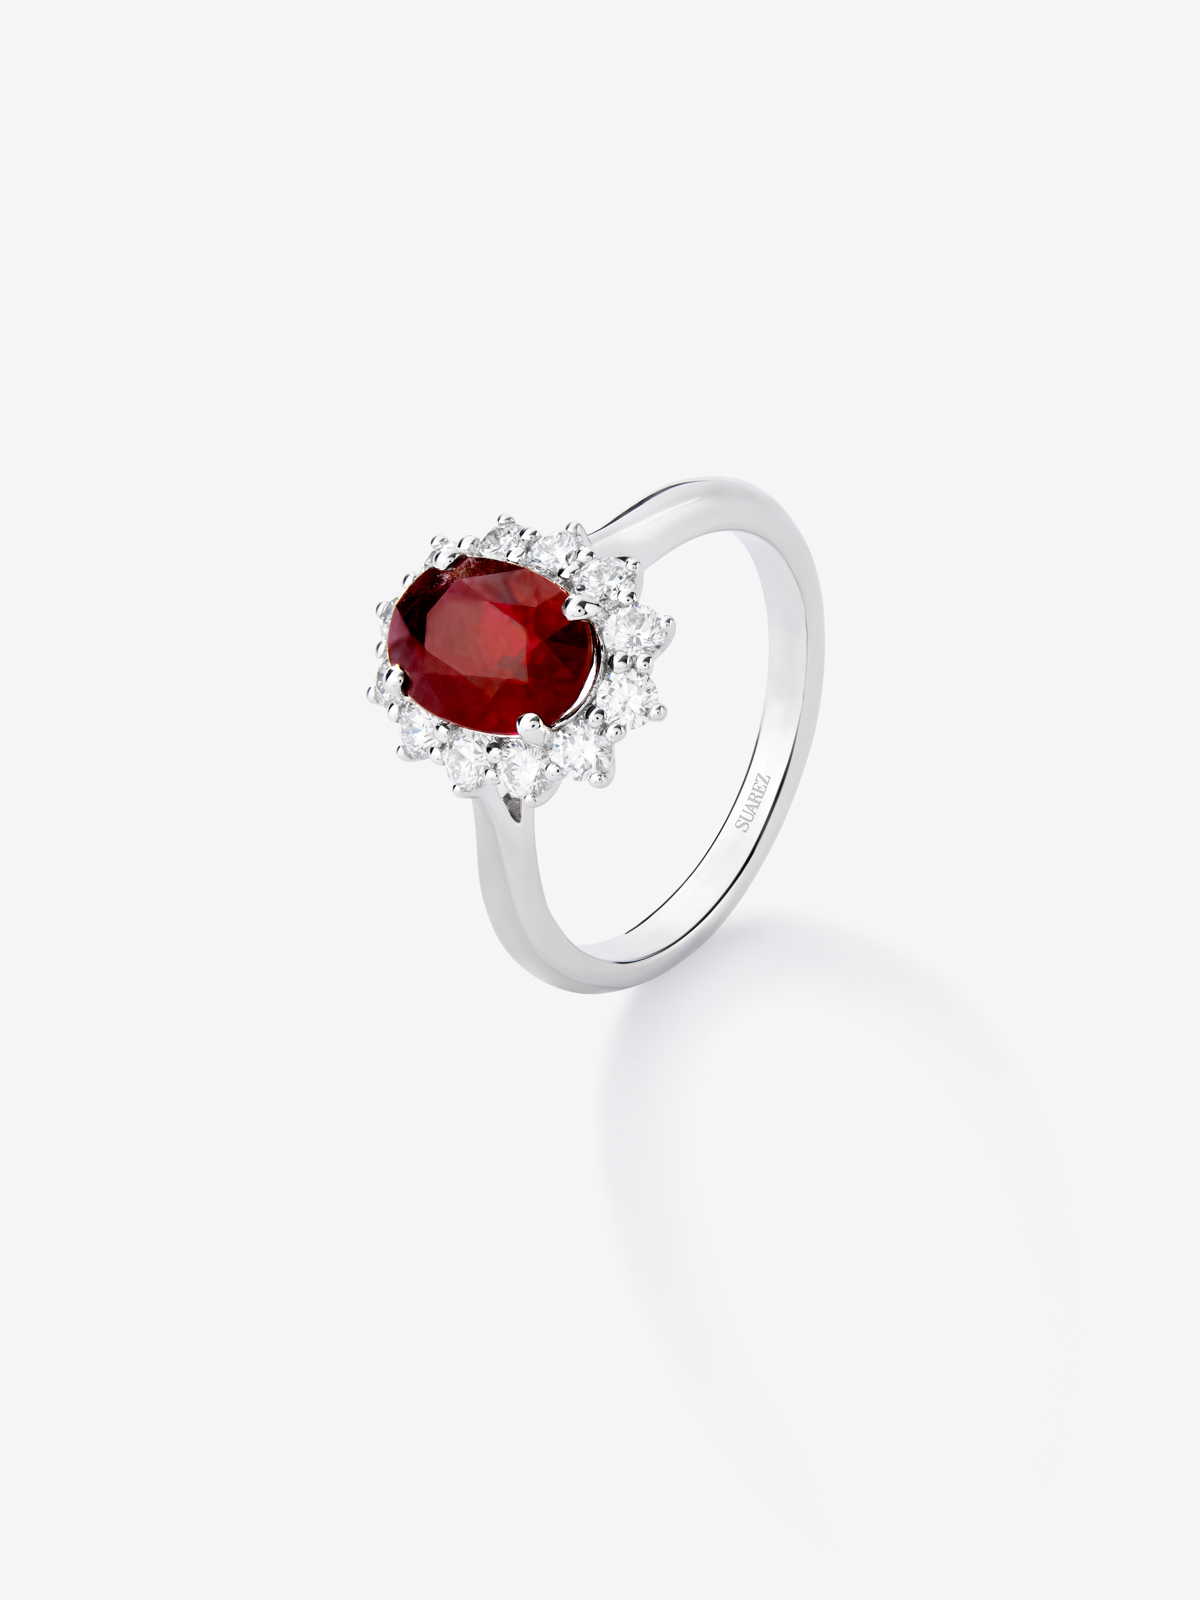 18K White Gold Ring with Red Red Vivid in 2.37 cts oval size and white diamonds of 0.6 cts